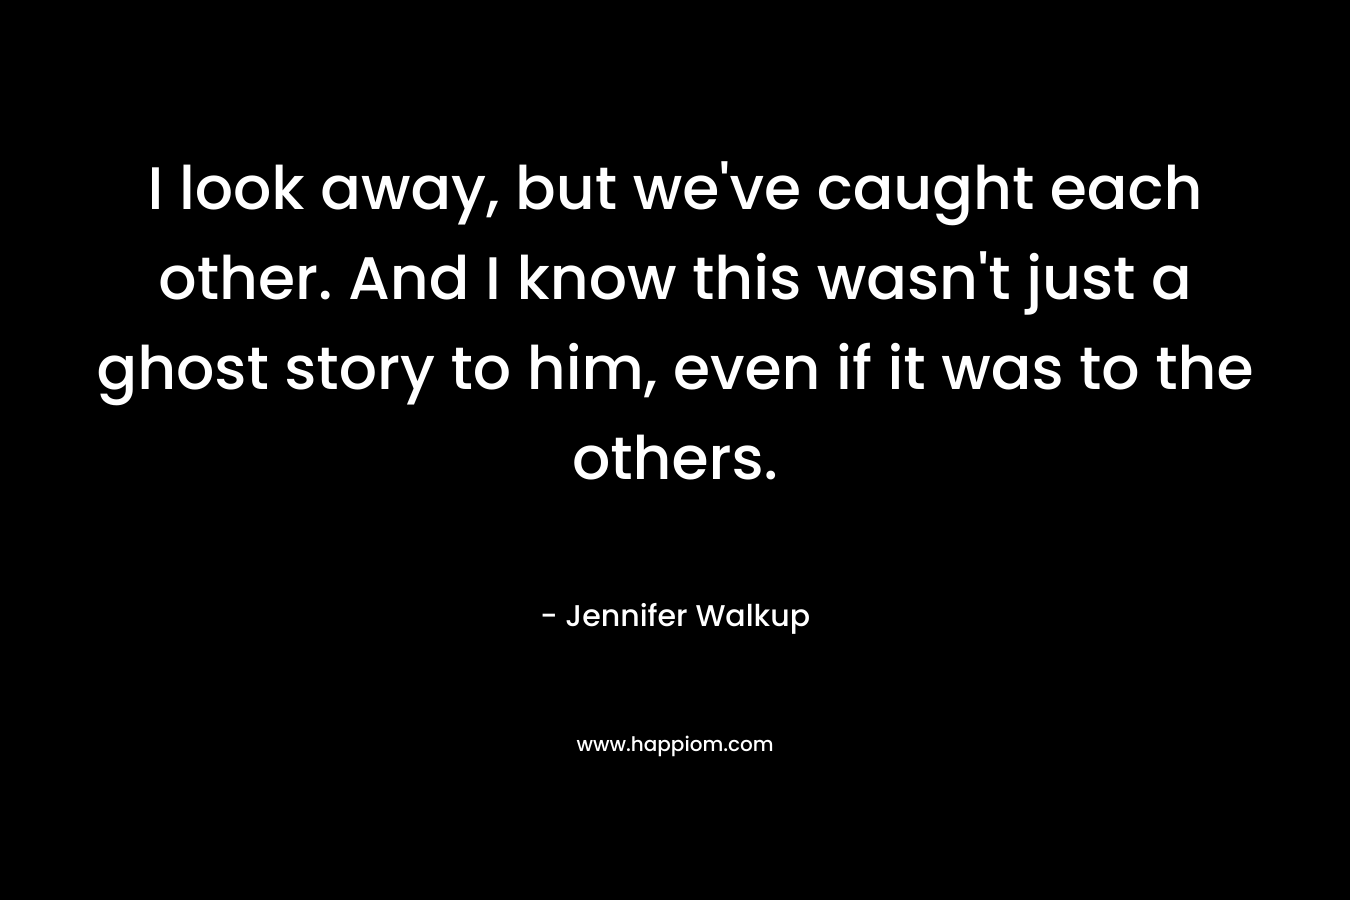 I look away, but we’ve caught each other. And I know this wasn’t just a ghost story to him, even if it was to the others. – Jennifer Walkup